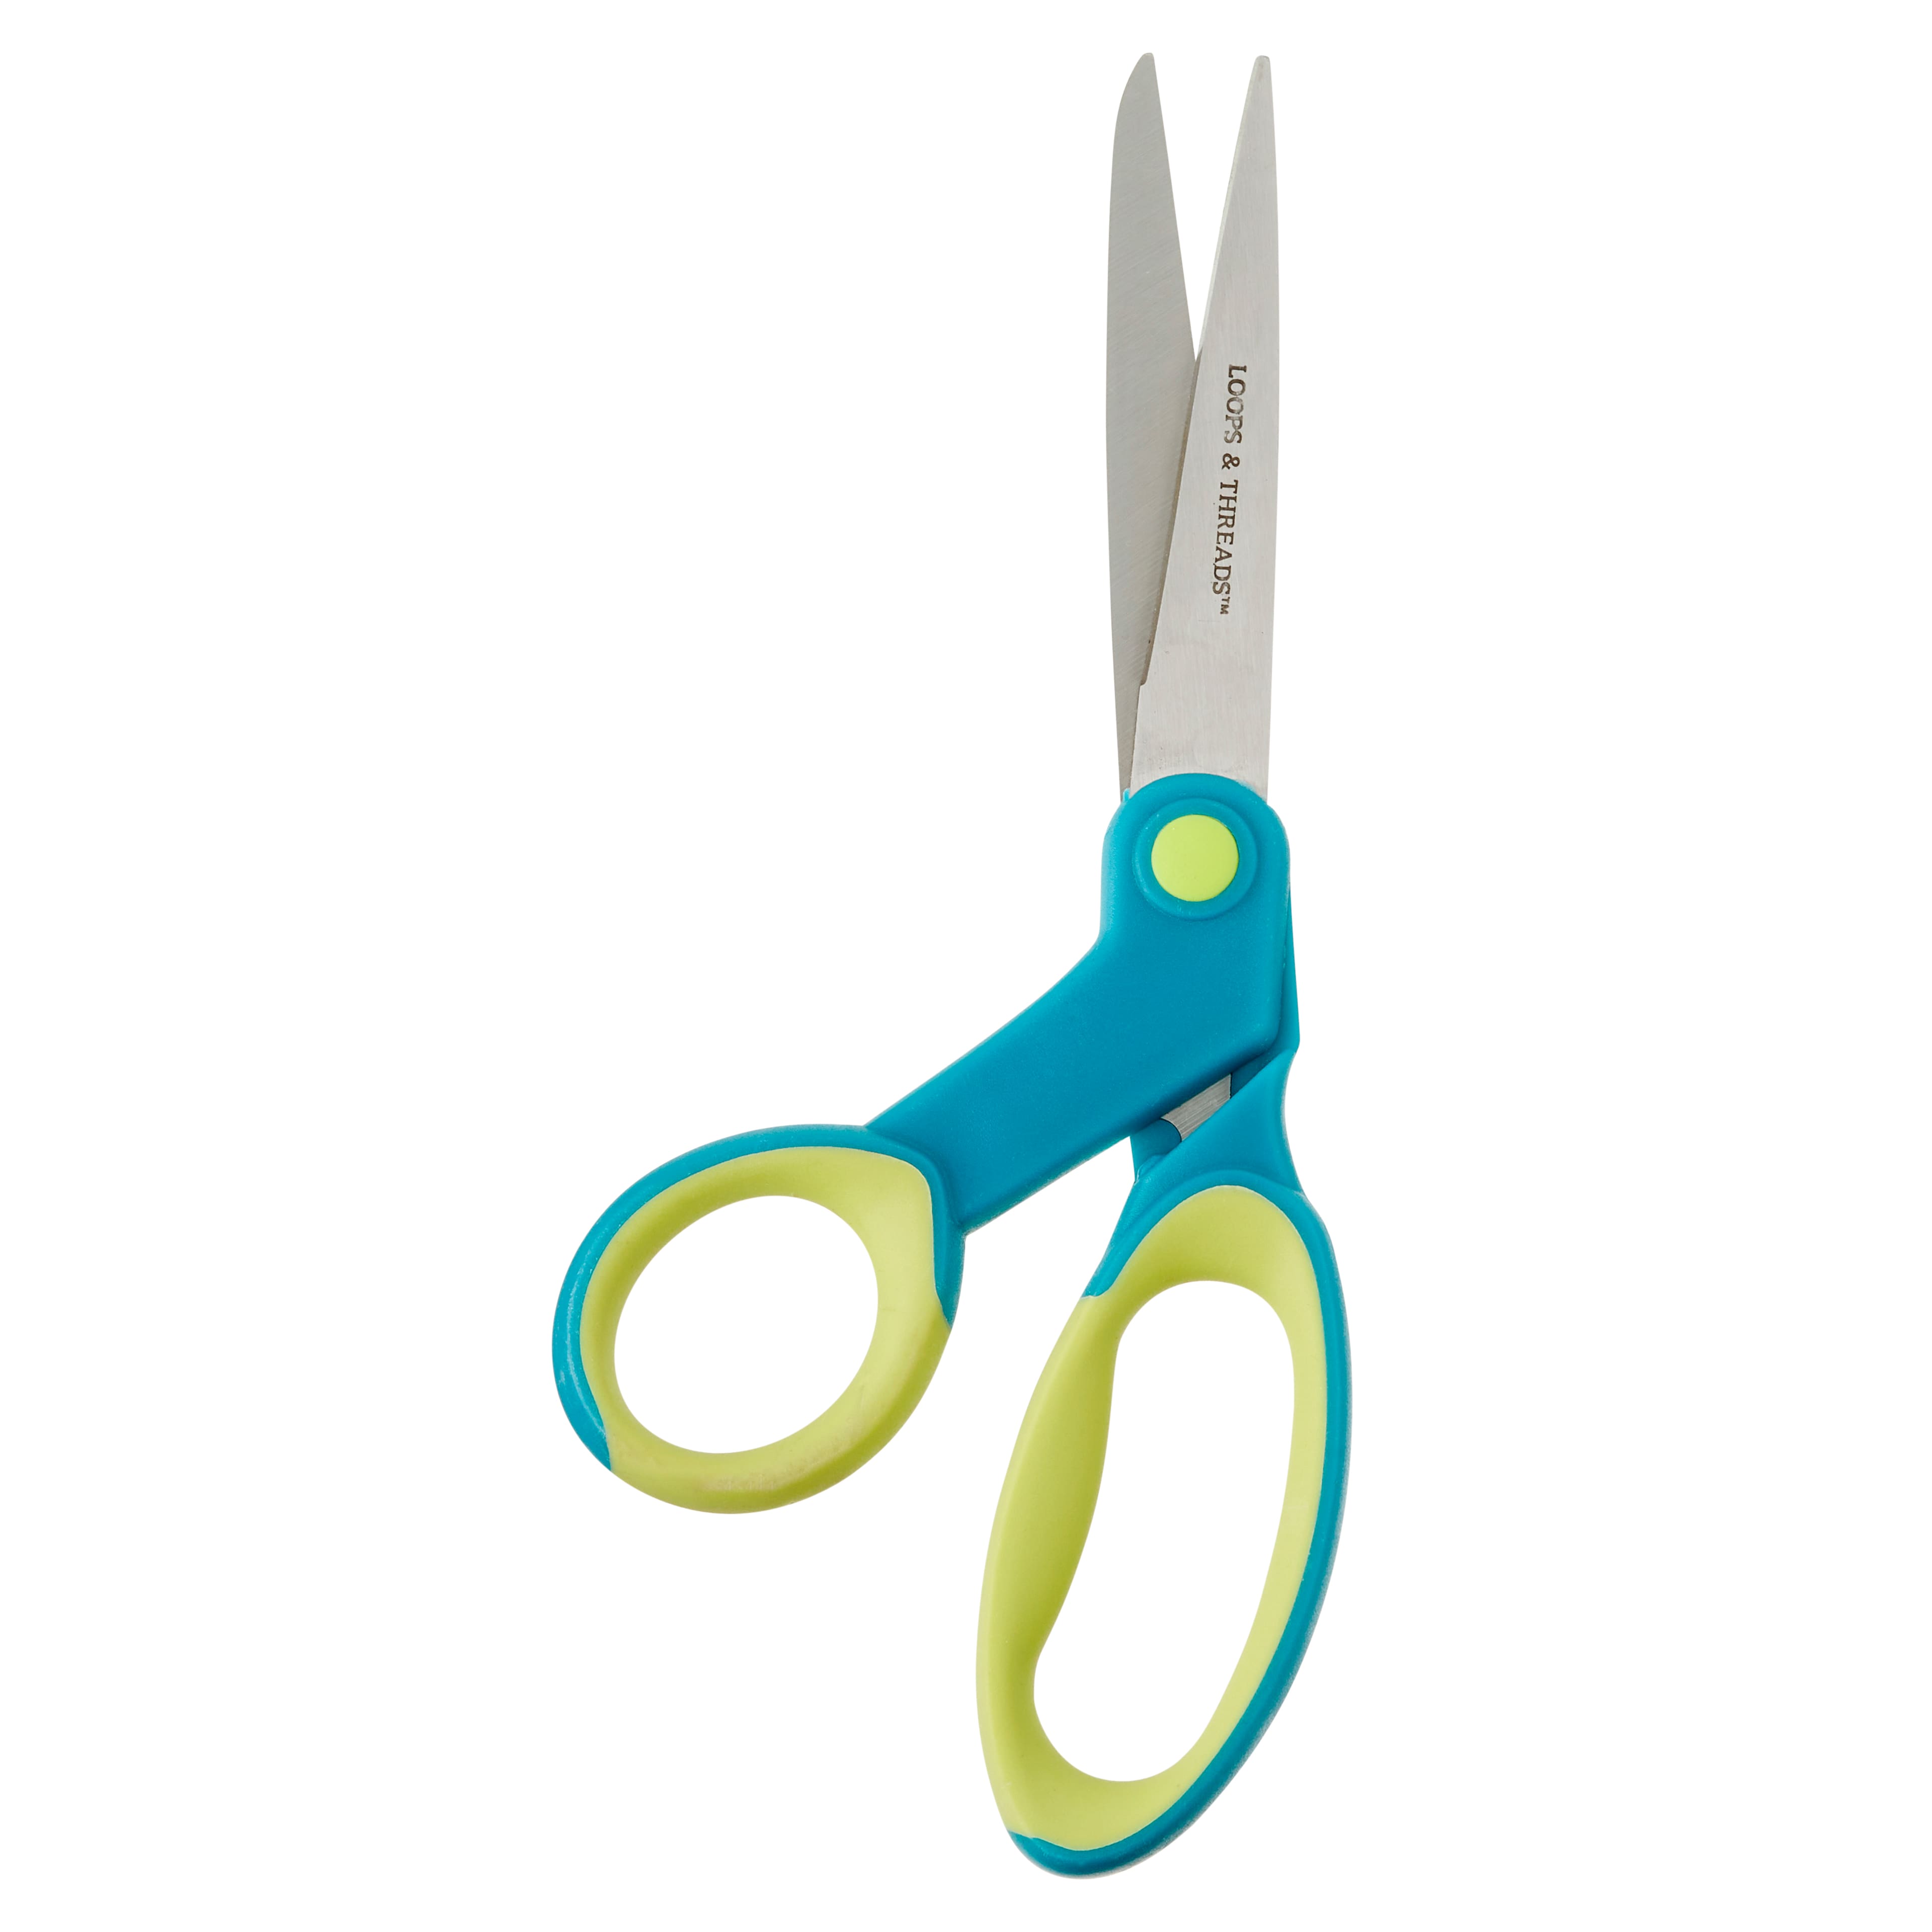 The Trouble with Left-Handed Scissors